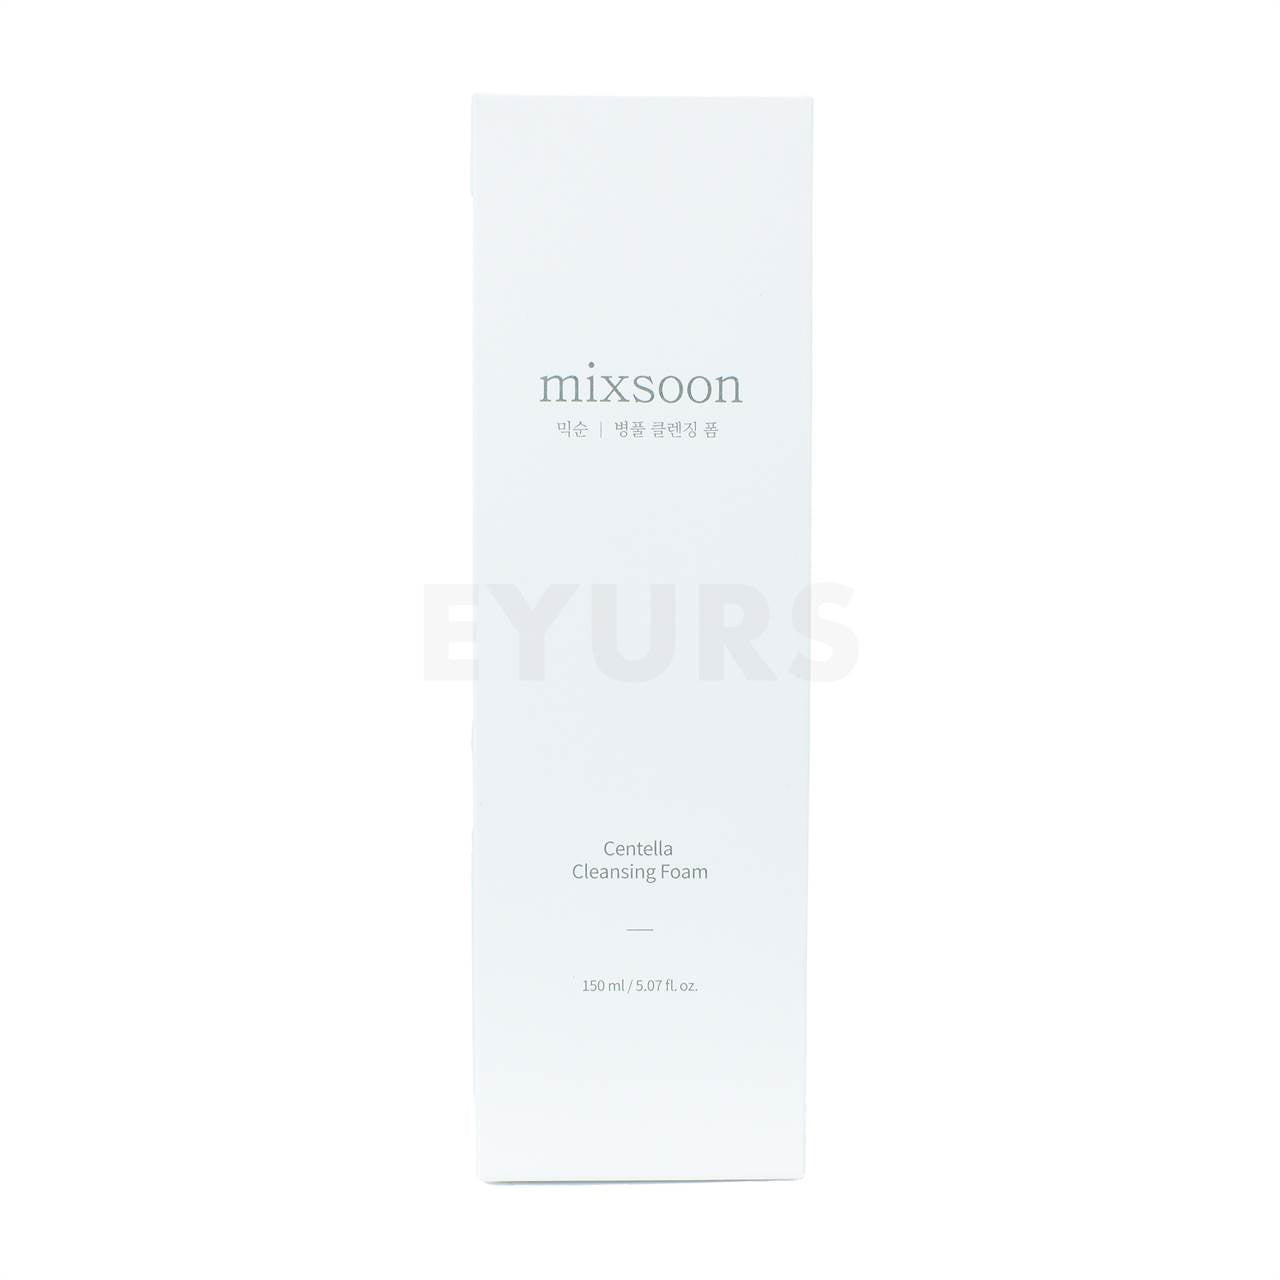 mixsoon centella cleansing foam 150ml front side packaging